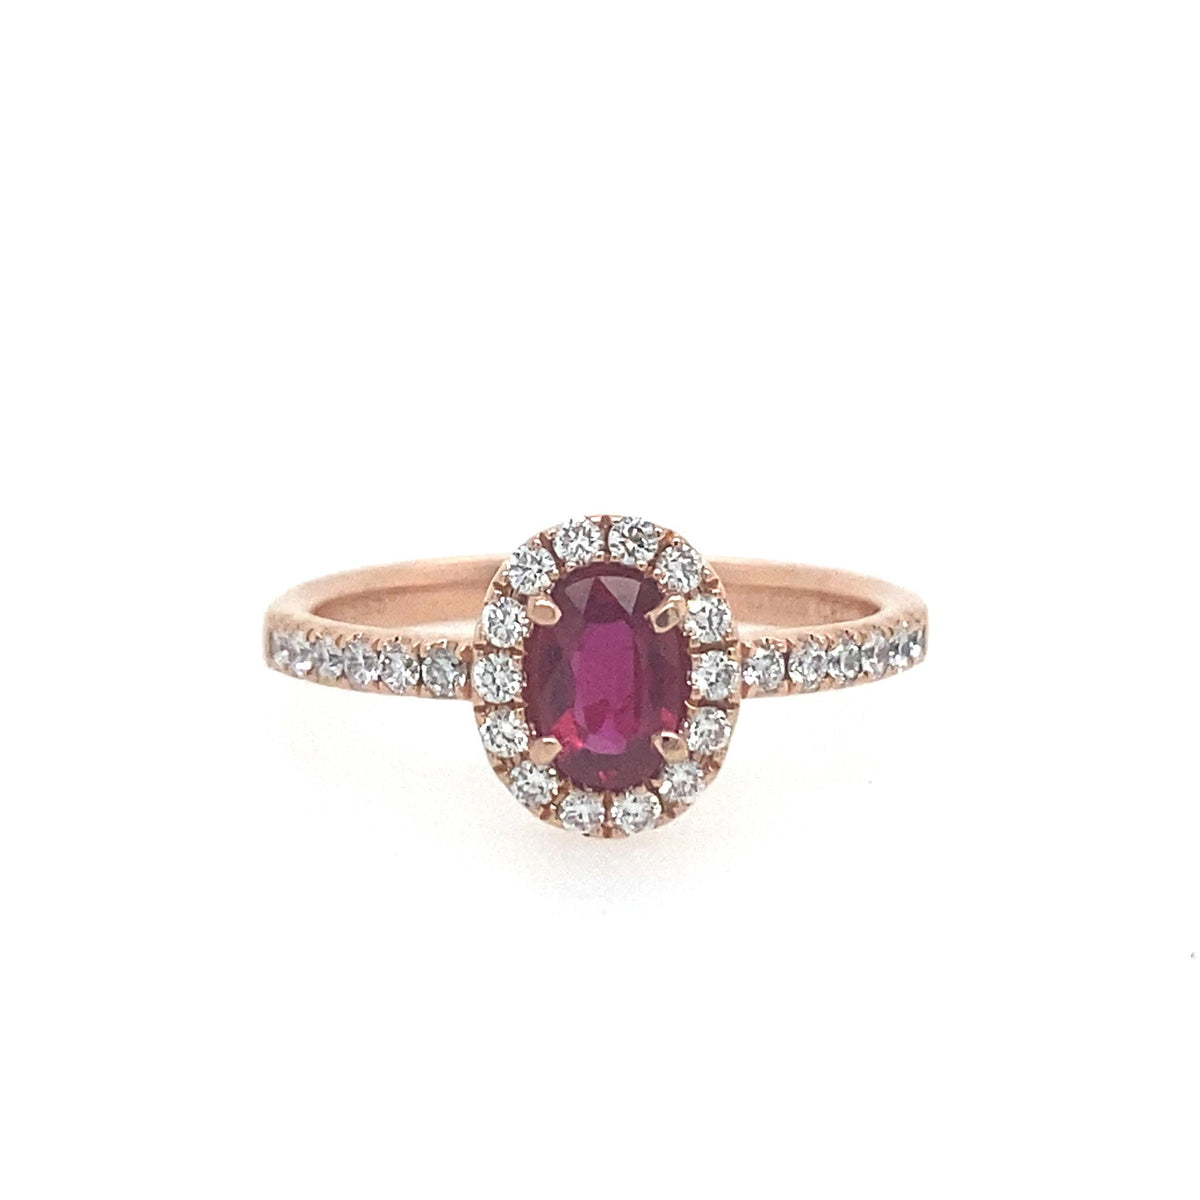 14Kt Rose Gold Halo Gemstone Ring With 0.46ct Ruby